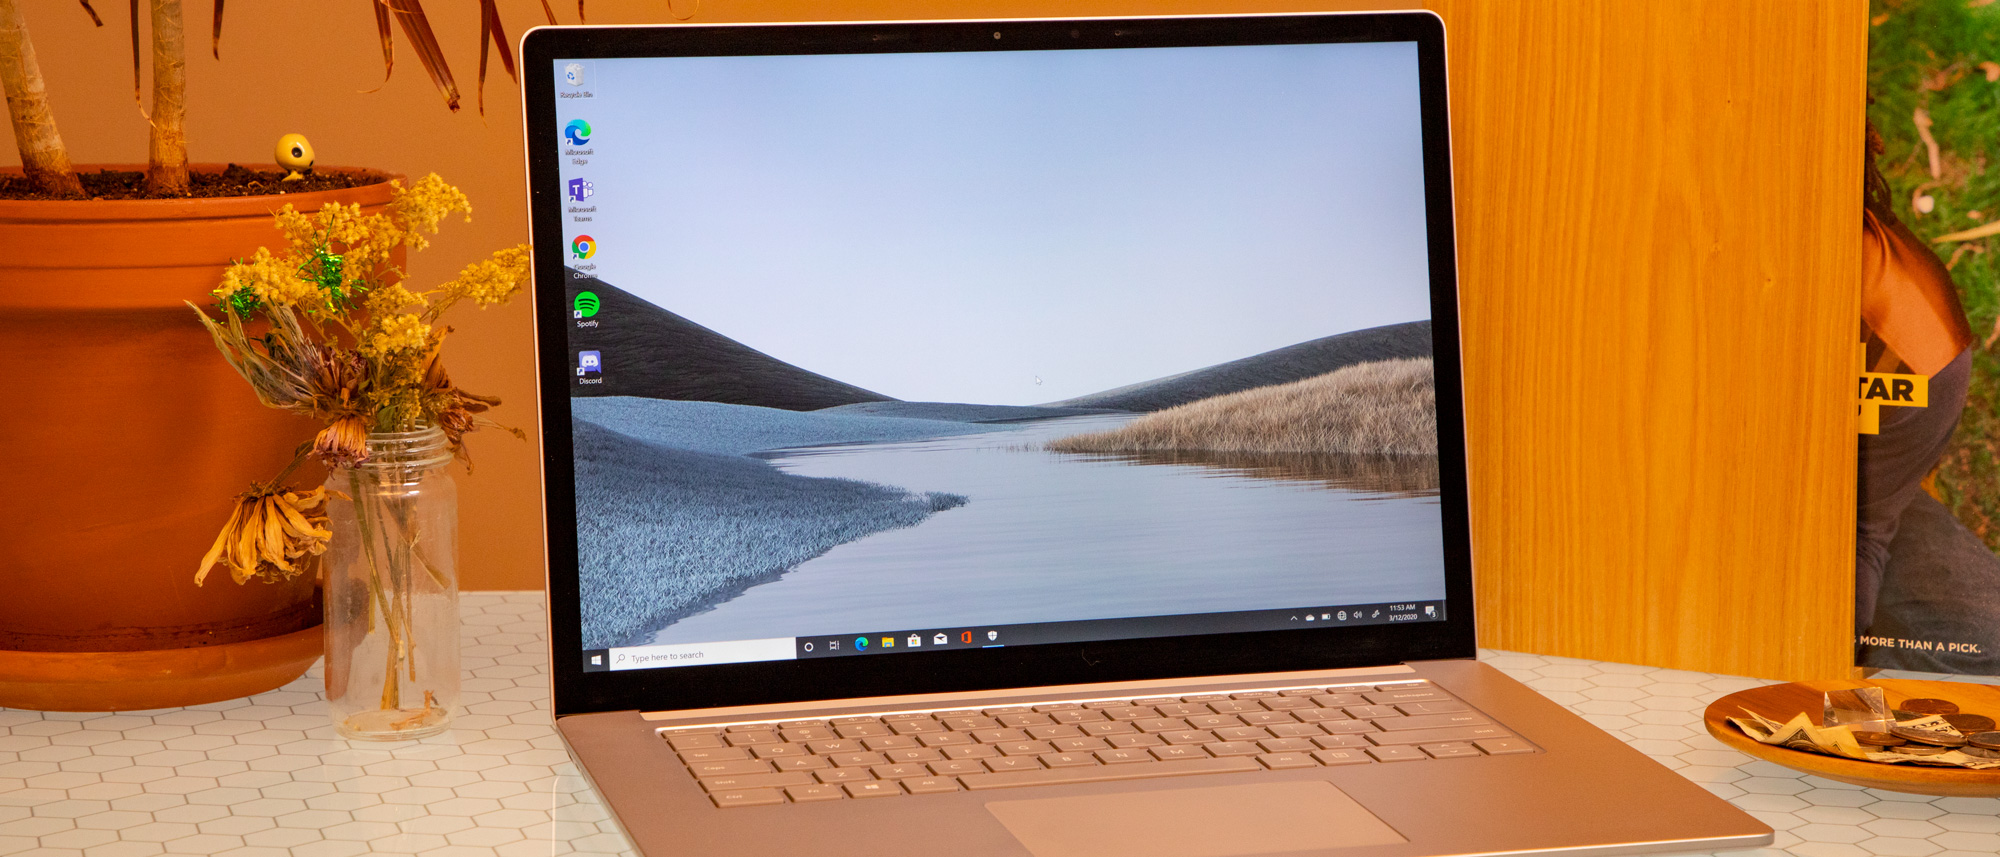 Microsoft Surface Laptop 3 (13.5-Inch) Review